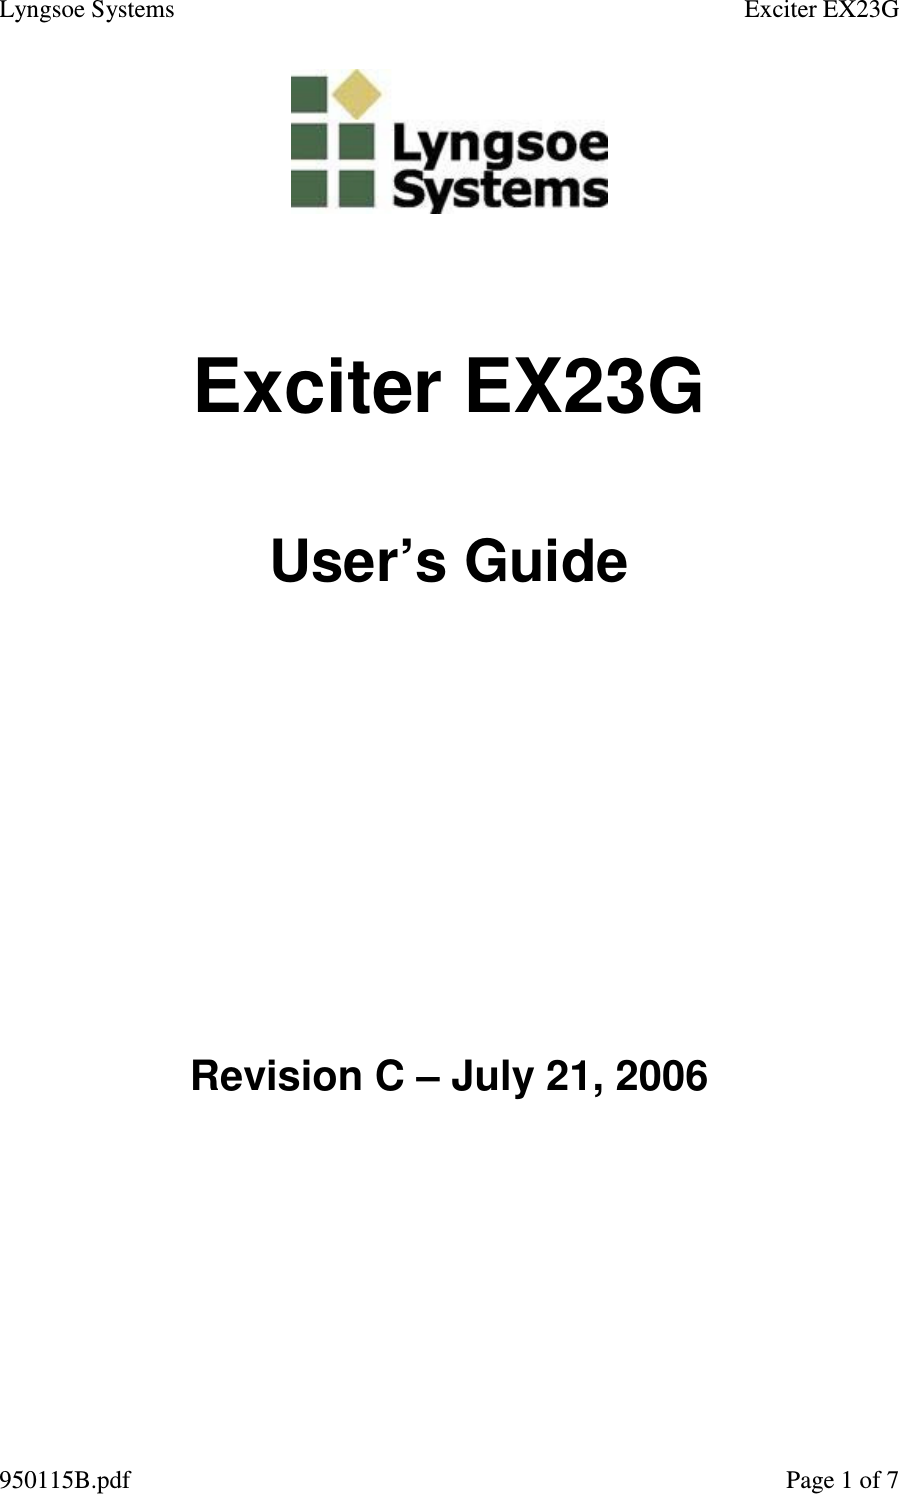 Lyngsoe Systems    Exciter EX23G 950115B.pdf    Page 1 of 7  Exciter EX23G  User’s Guide   Revision C – July 21, 2006  